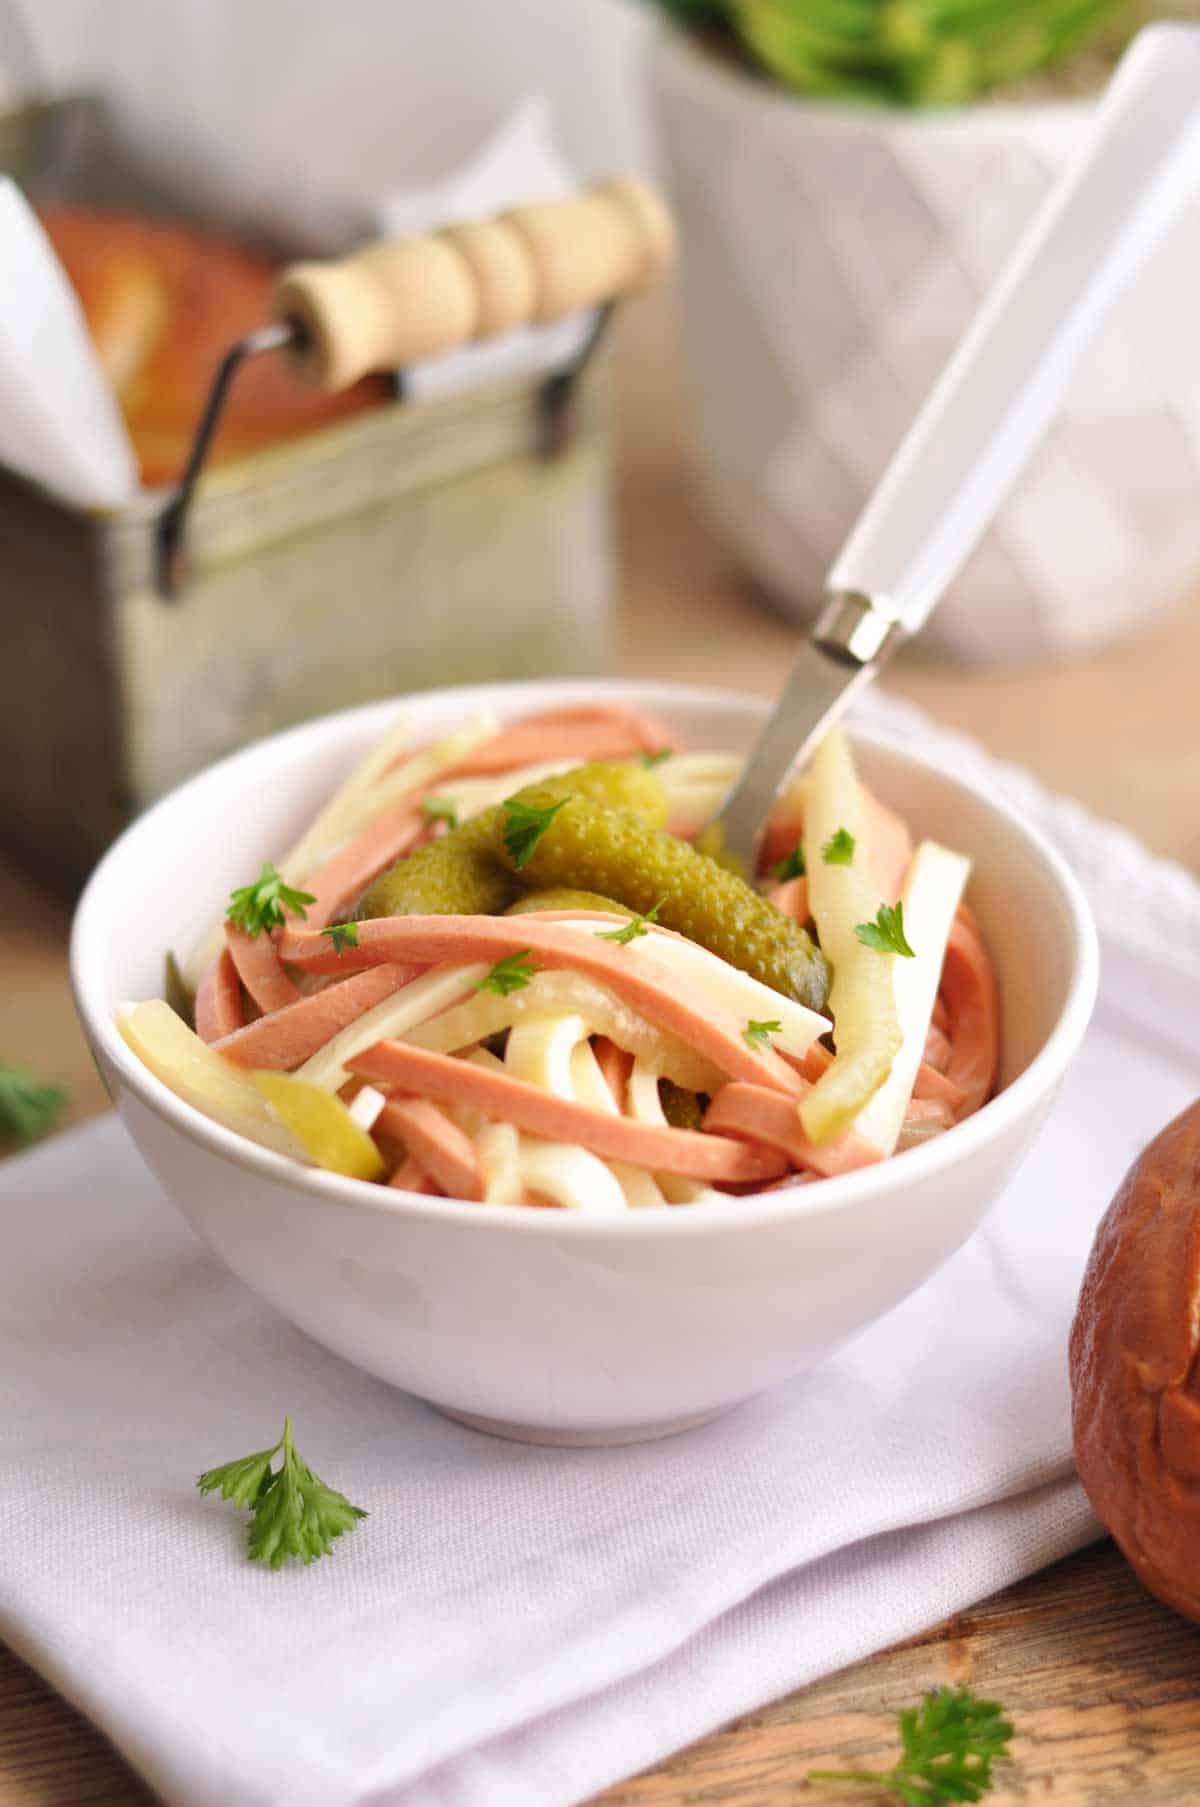 German Wurst Salad with Dill Pickled and Bologna